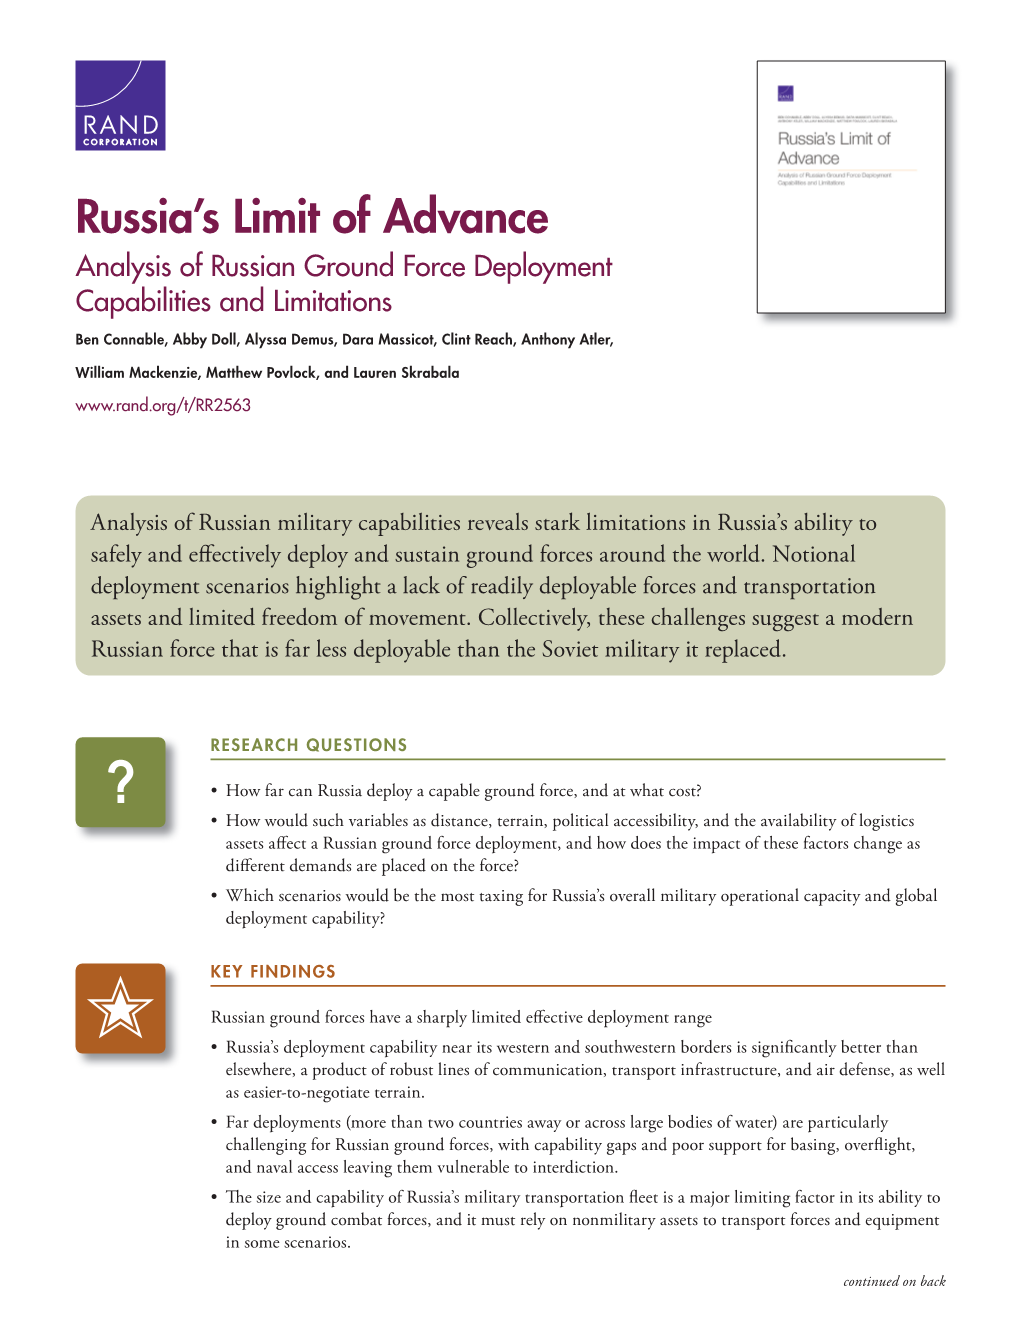 Analysis of Russian Ground Force Deployment Capabilities and Limitations